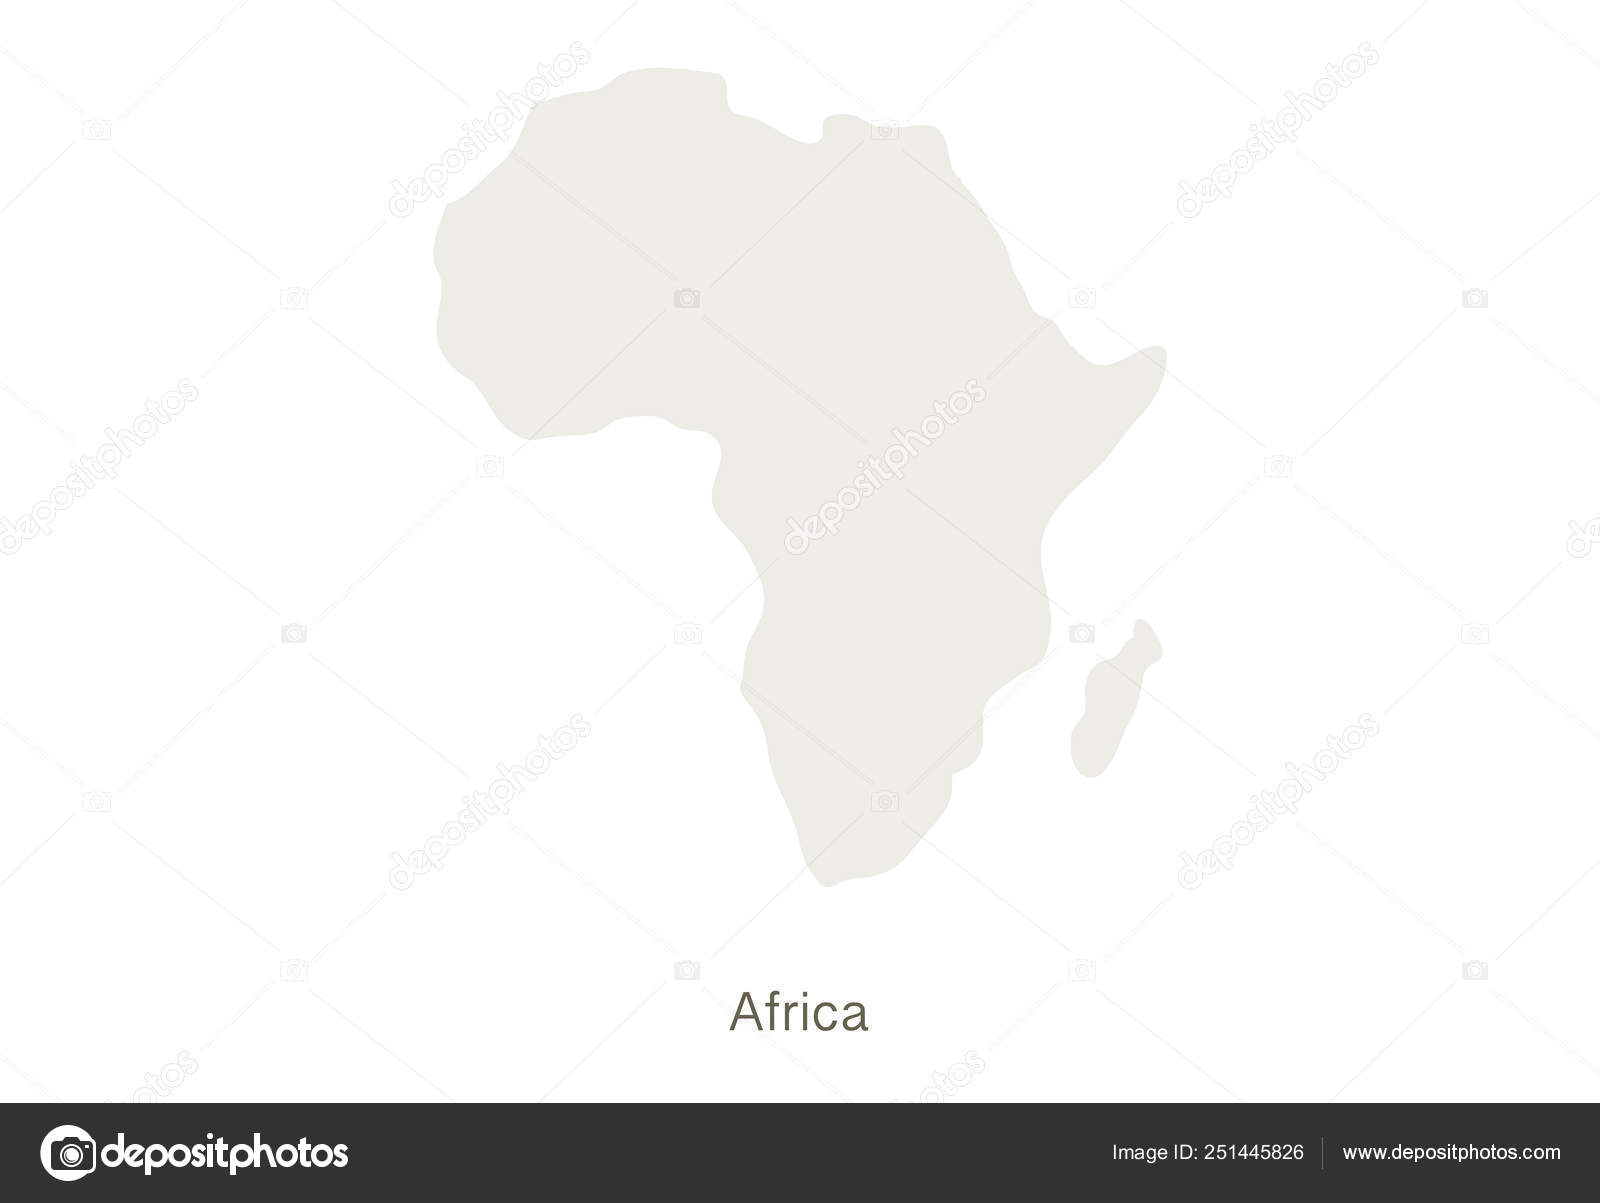 Mockup Of Africa Map On A White Background Vector Illustration Template Vector Image By C Oksanastepova Vector Stock 251445826